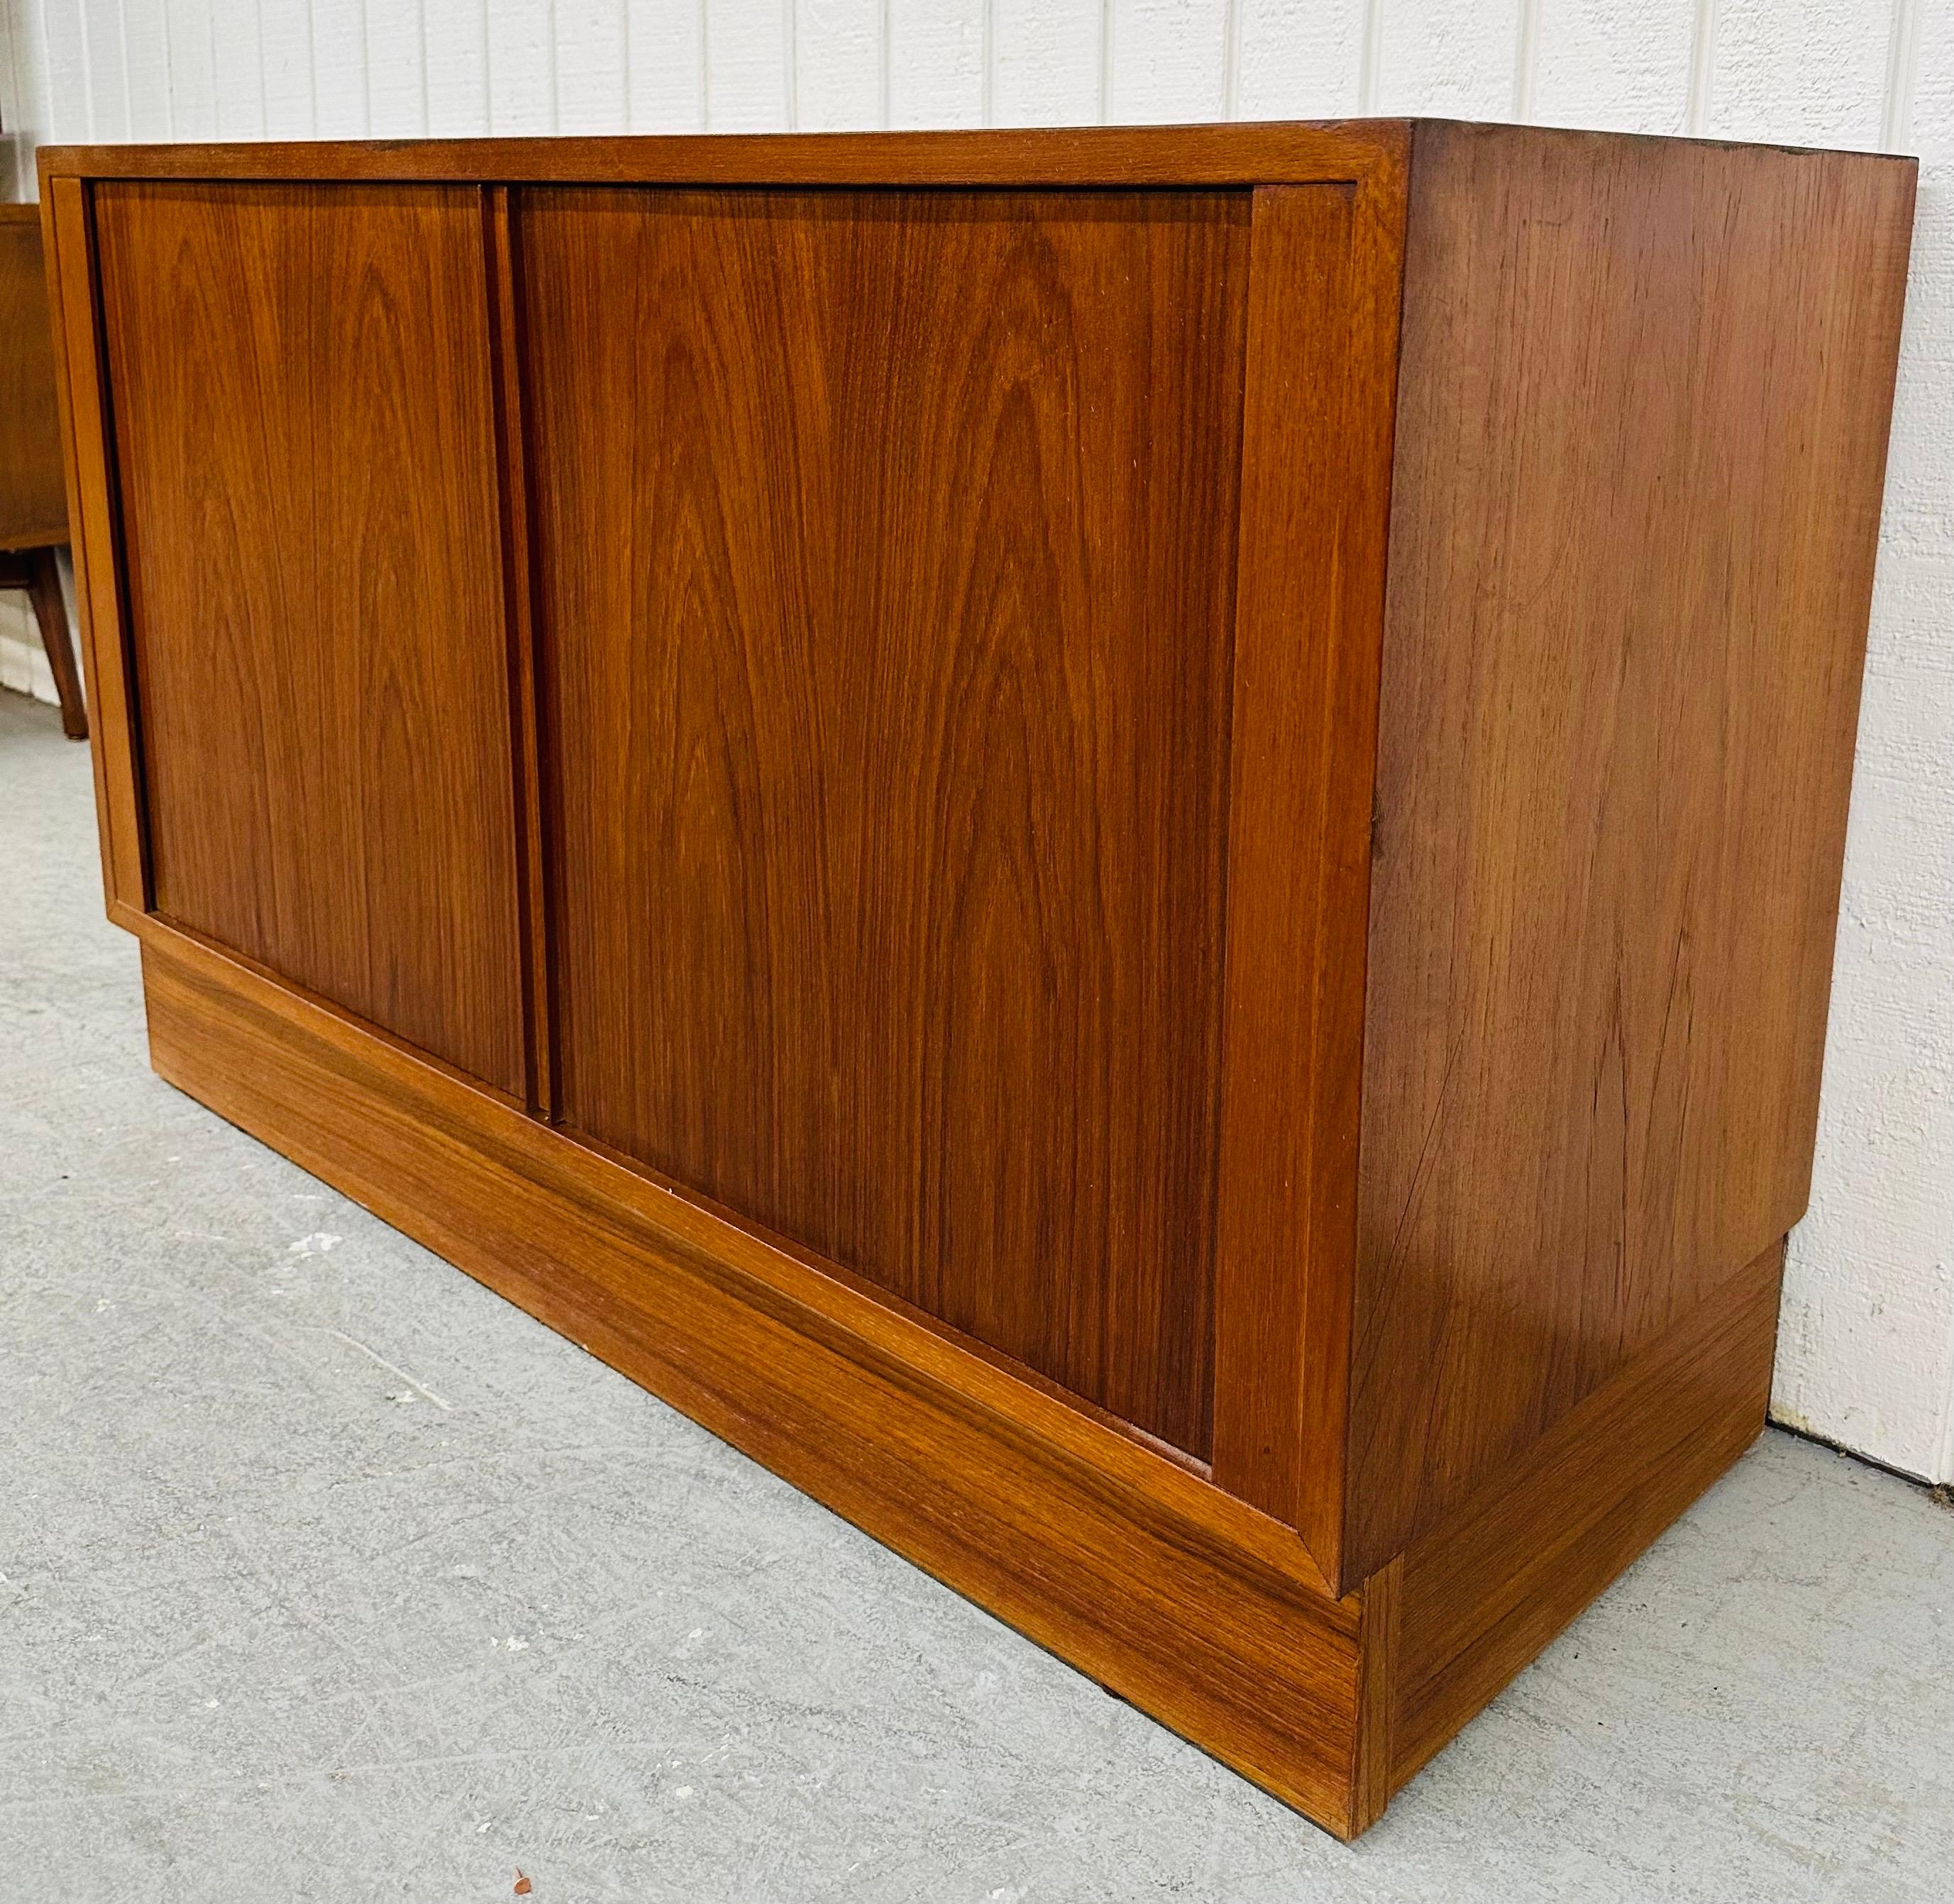 This listing is for a Mid-Century Danish Modern Teak Tambour Cabinet. Featuring a straight line design, sliding  tambour doors that open up to storage space, plinth base, and a beautiful teak finish. This is an exceptional combination of quality and